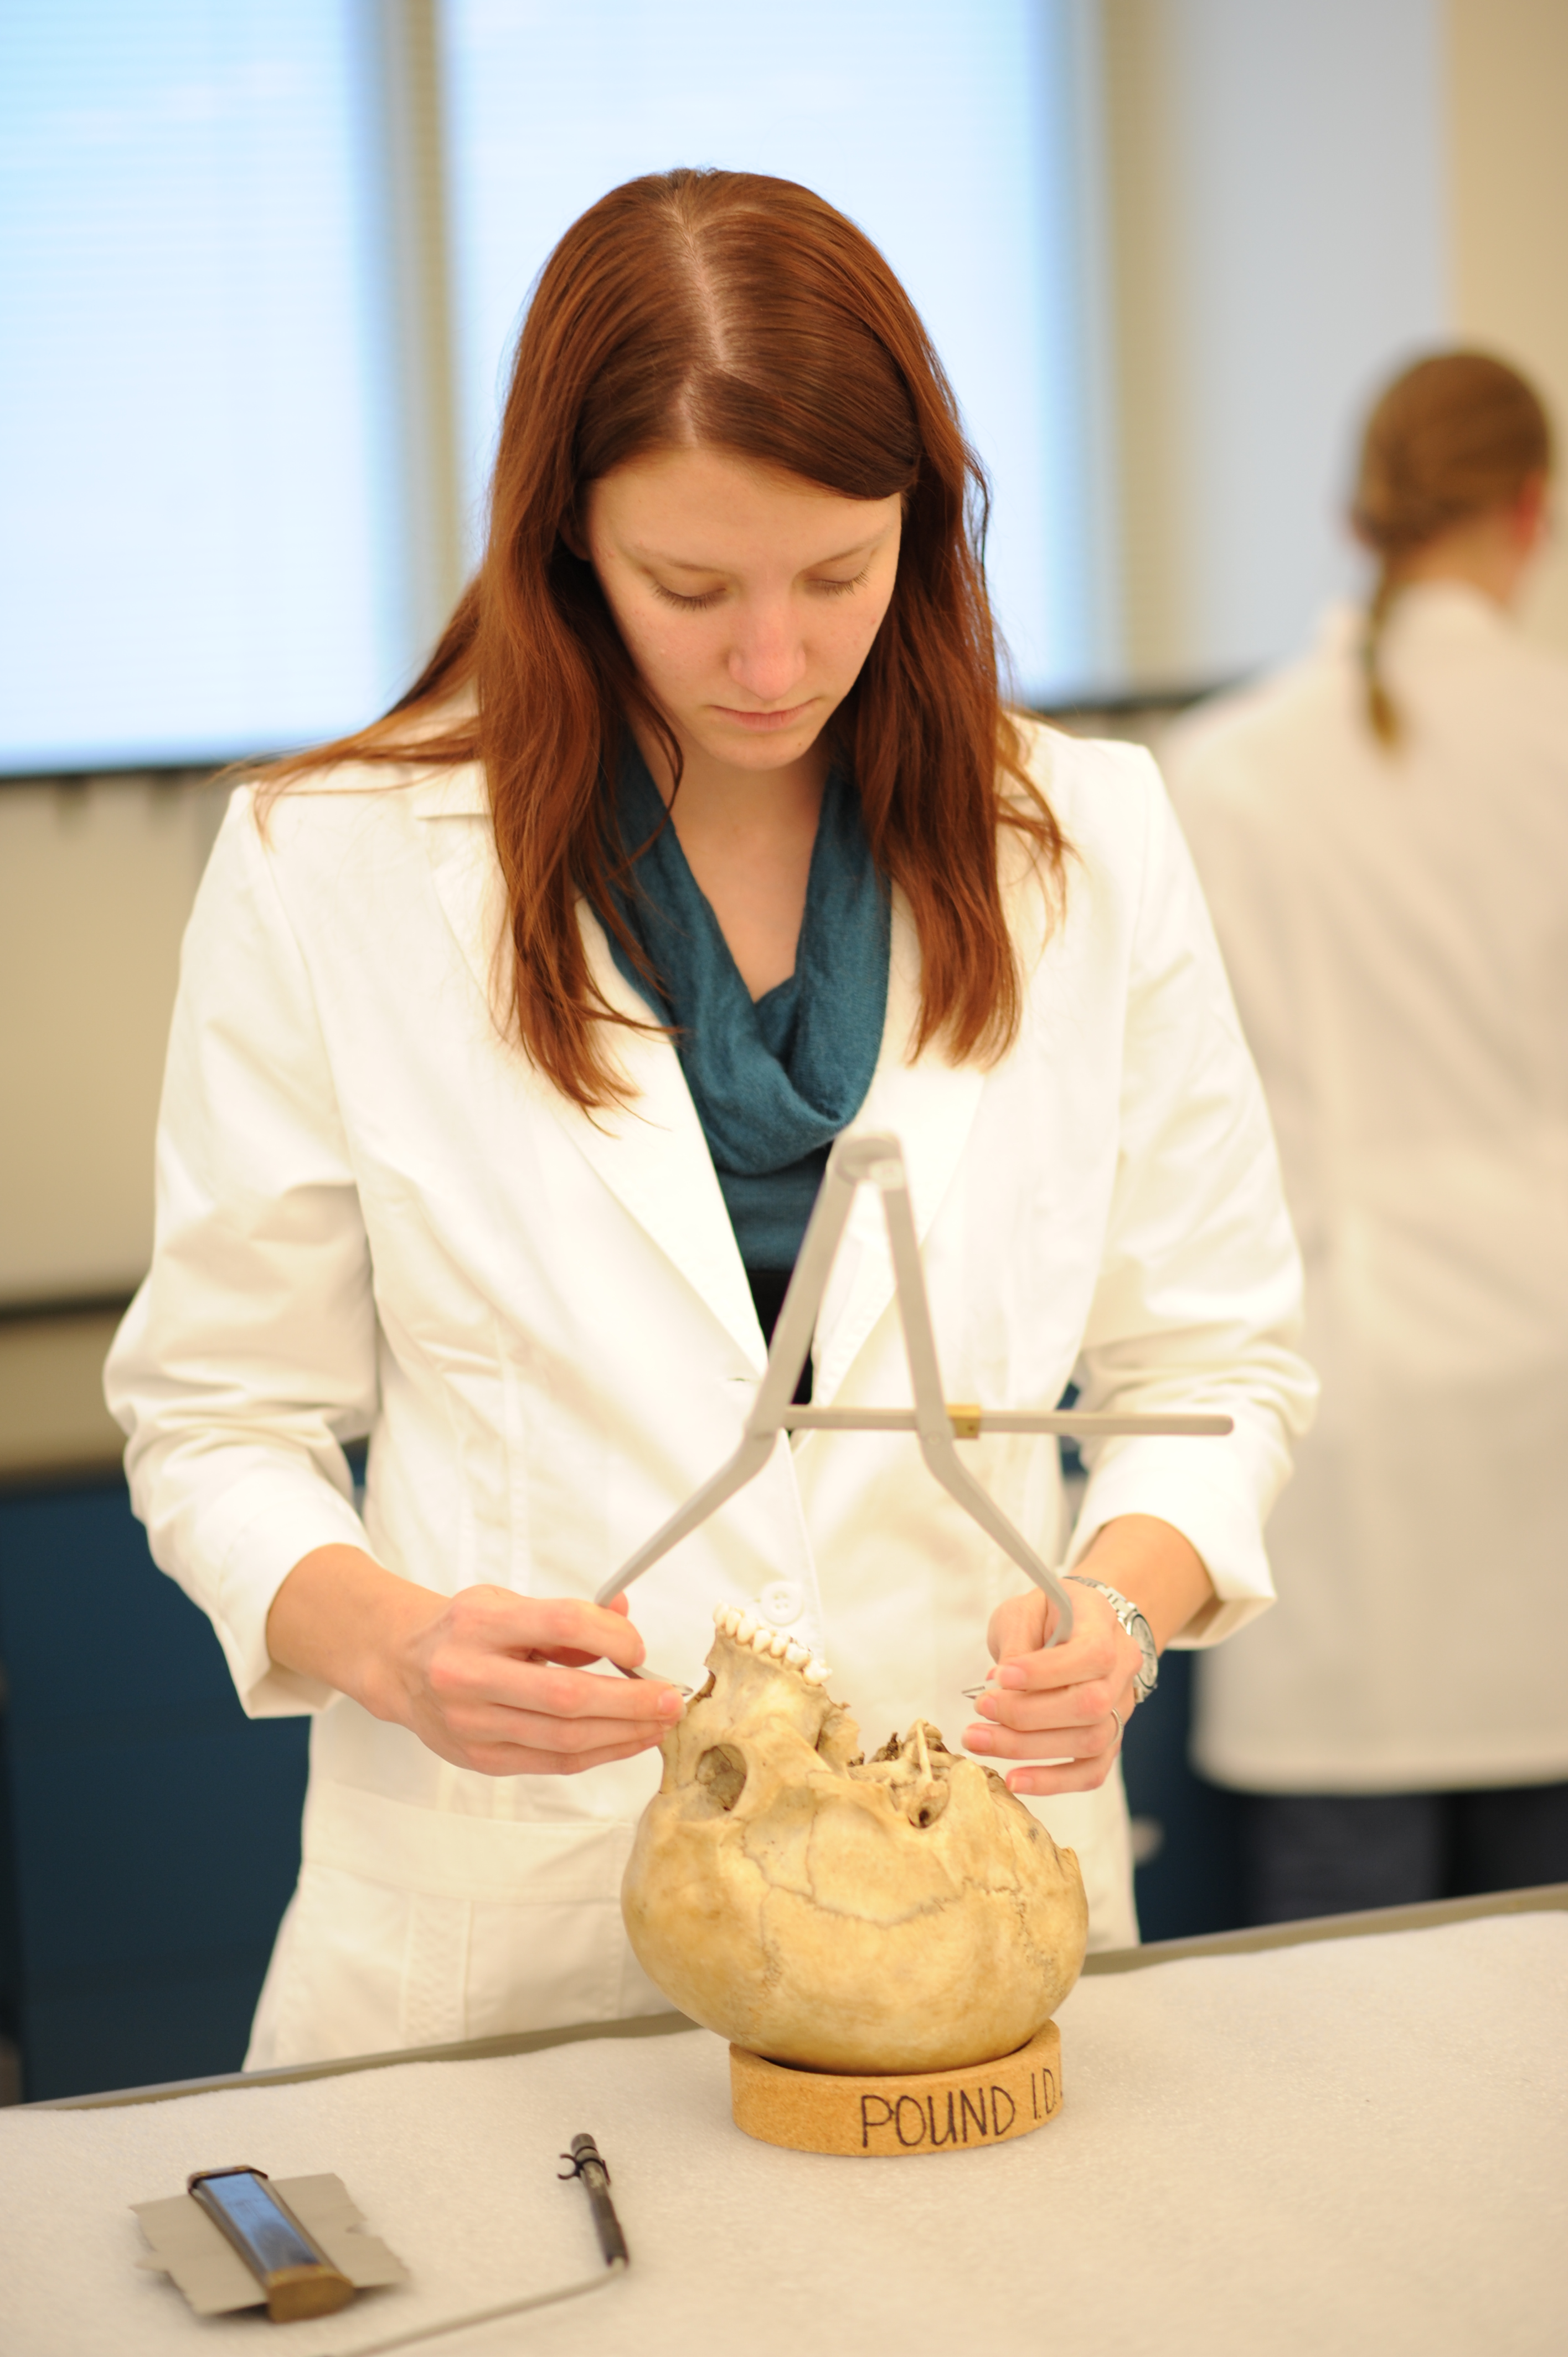 young woman in lab coat using tool to measure human skull